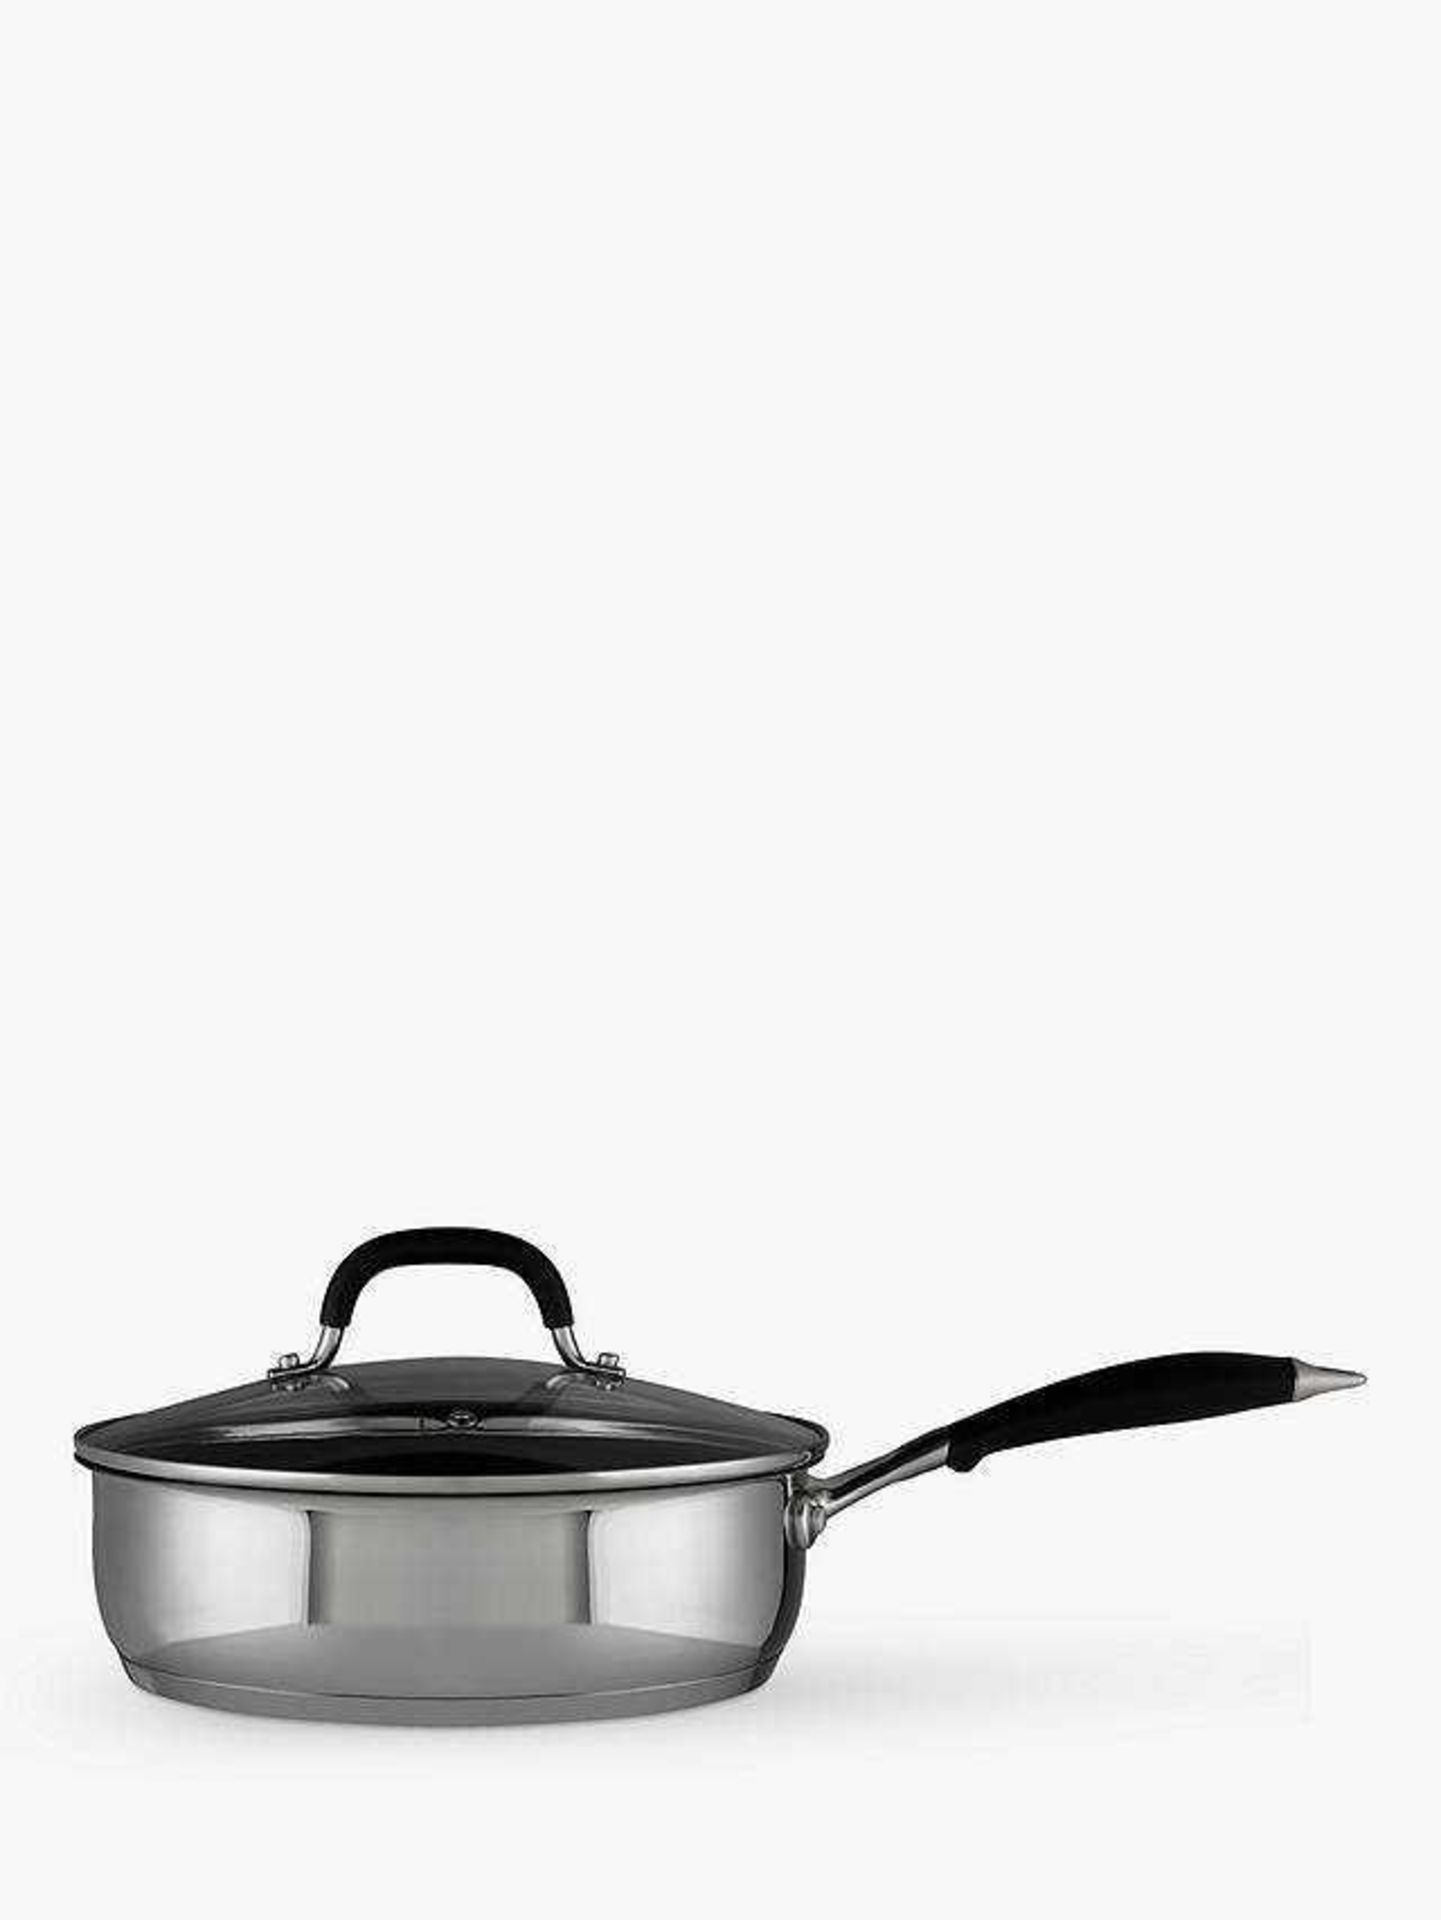 (At) RRP £395 Lot To Contain 1 X John Lewis Stockpot With Lid 1 X John Lewis SautÃ© Pan With Lid 1 X